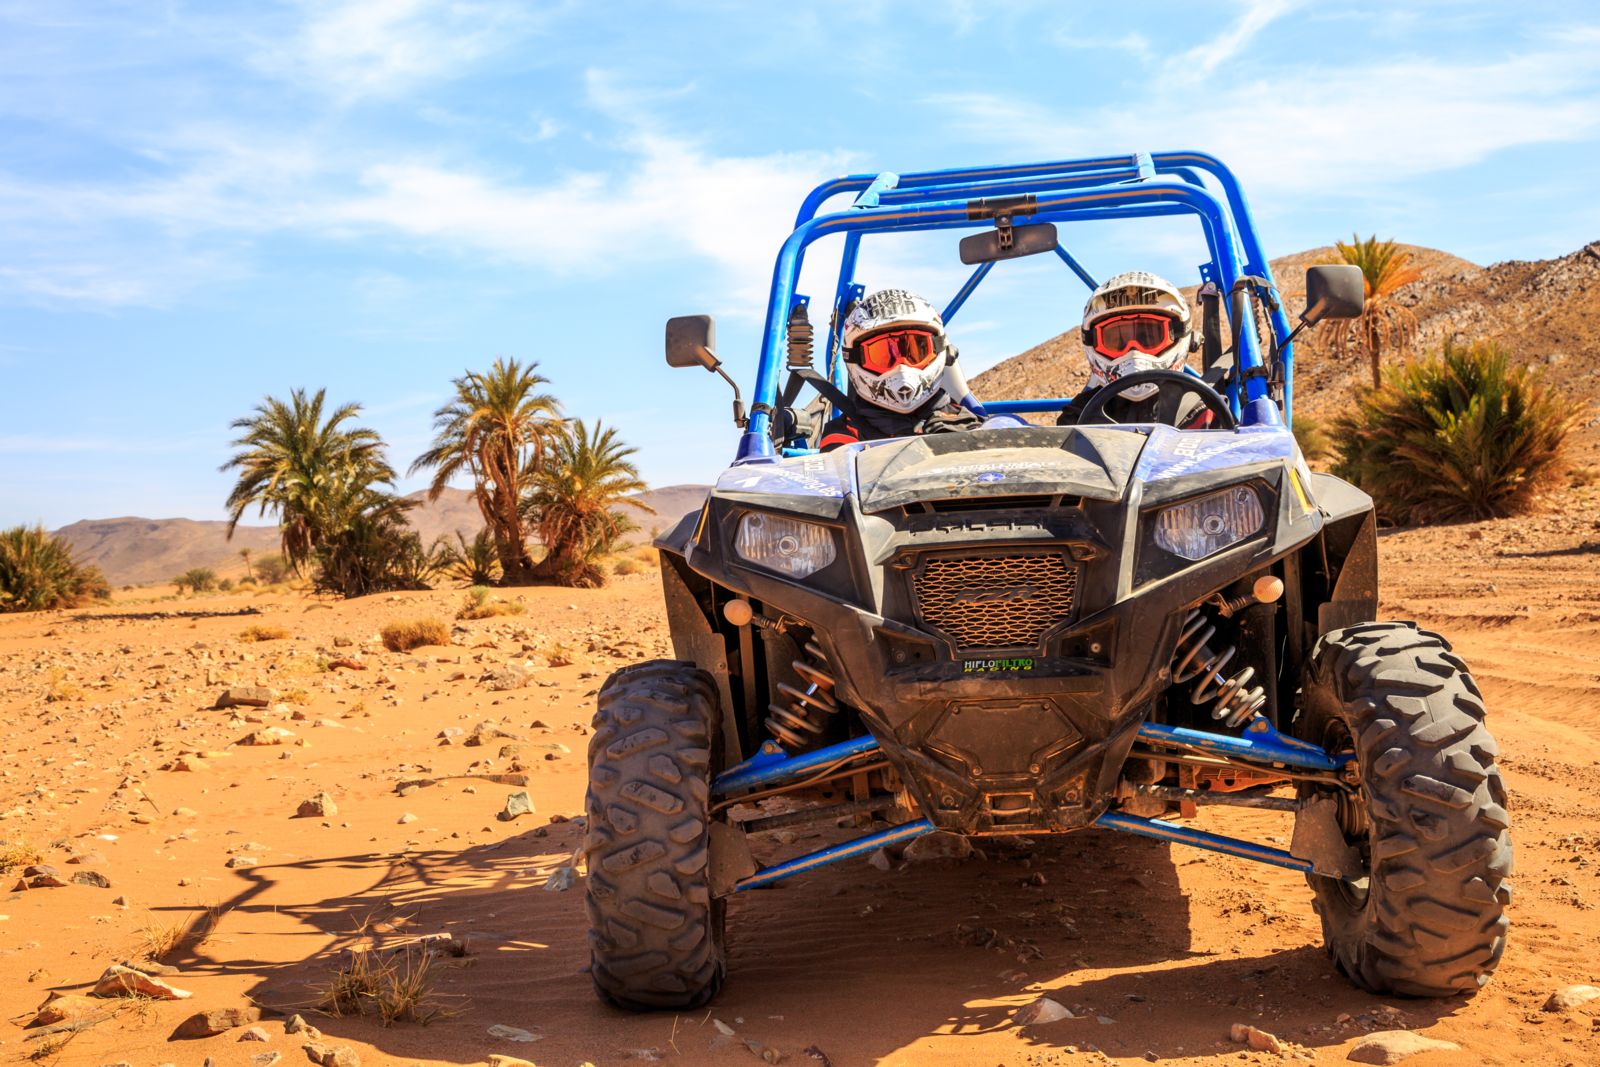 Blue offroad vehicle with two passengers in the desert